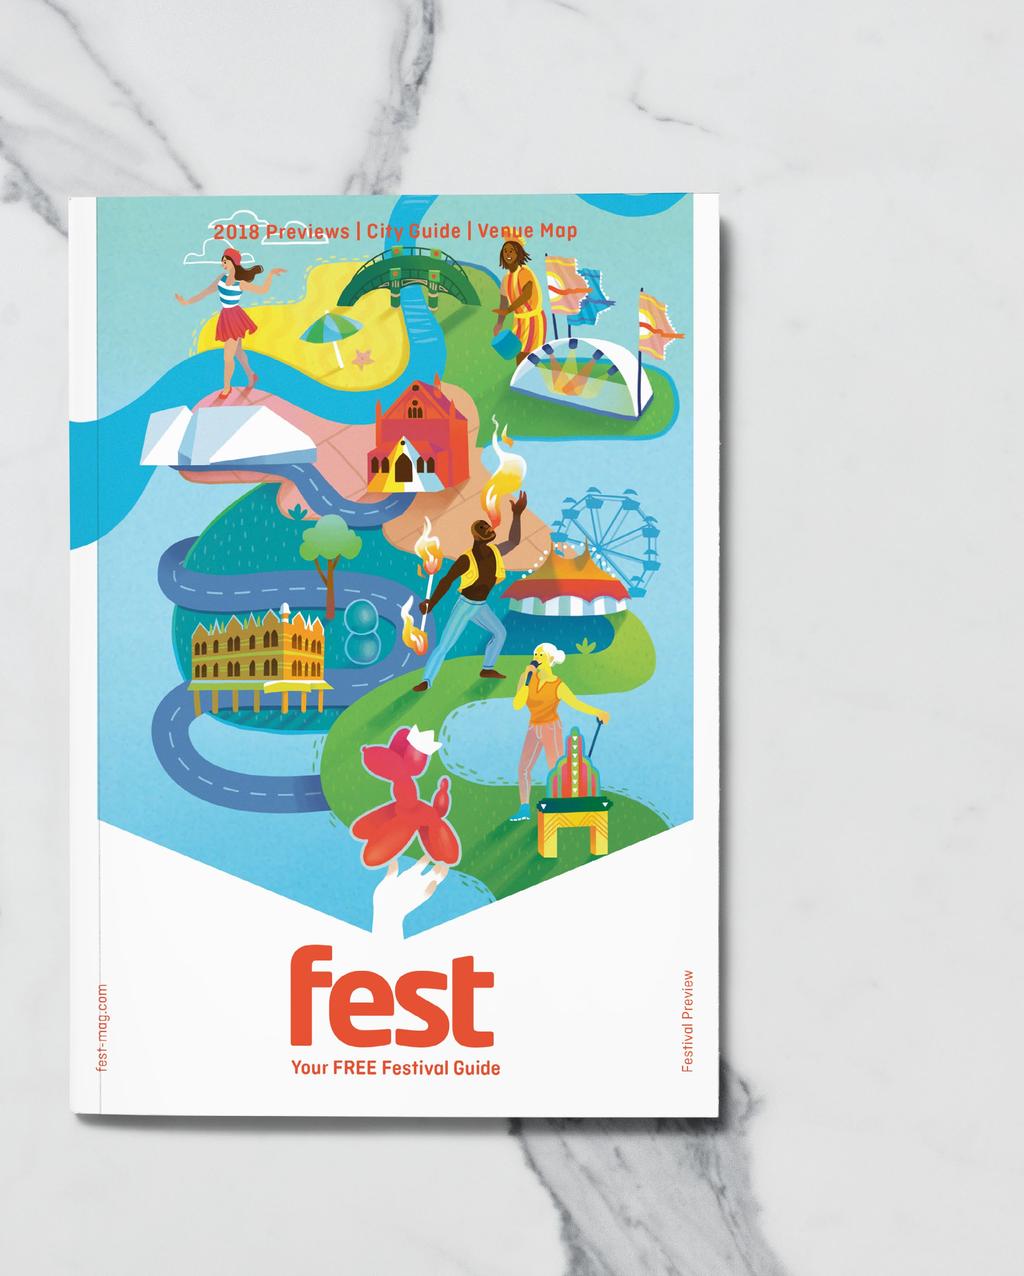 2 Fest is a festival review magazine from Edinburgh We ll be distributing 20,000 copies of our new festival magazine in Adelaide again this summer Launched 17 years ago with the goal of bringing a